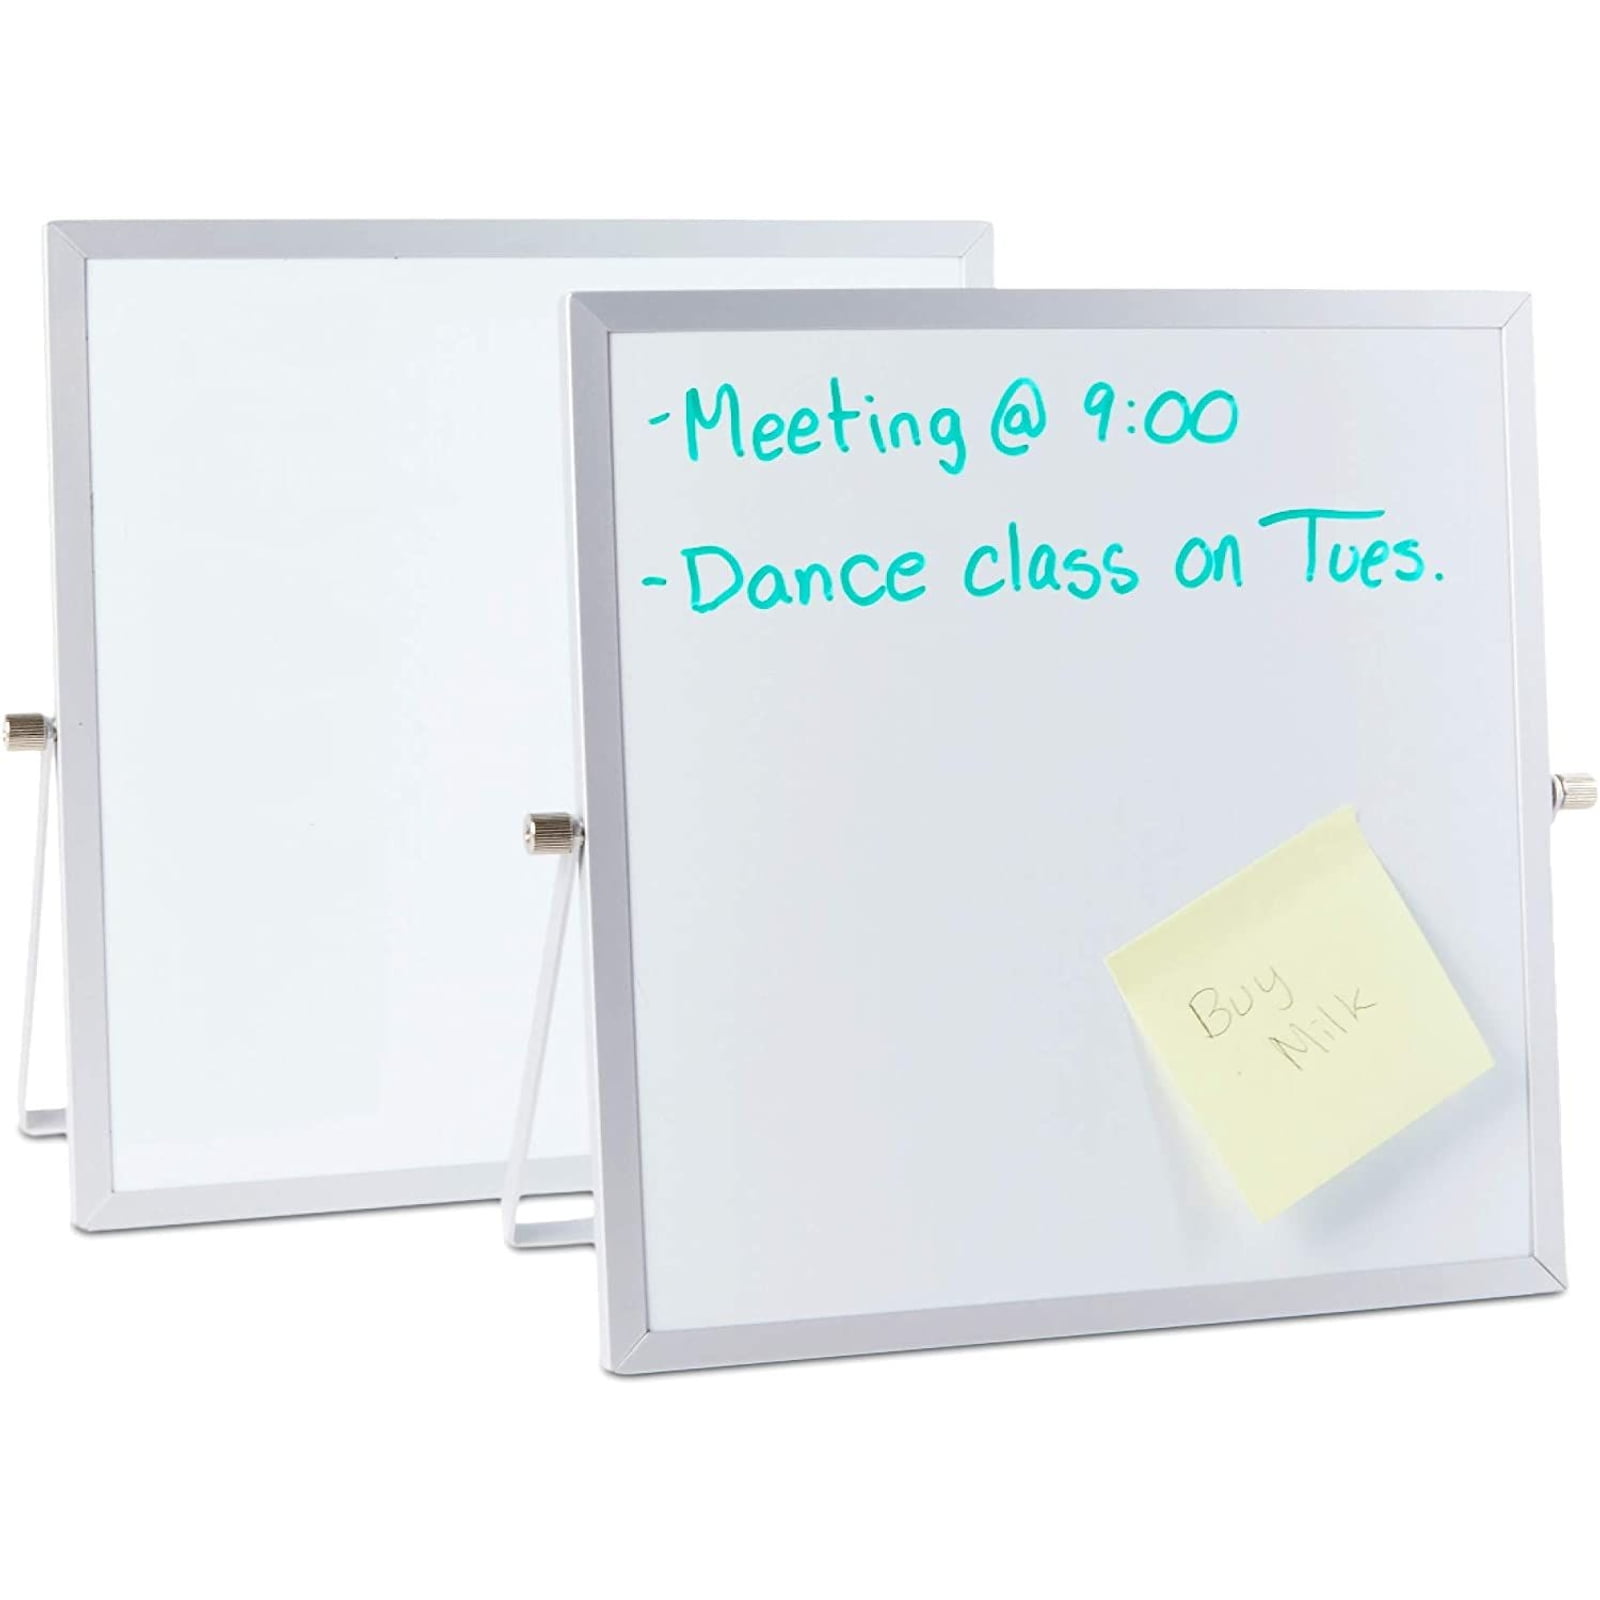 Details about   Chesean Small Dry Erase Board,Portable Magnetic White Board Double-Sided Desktop 